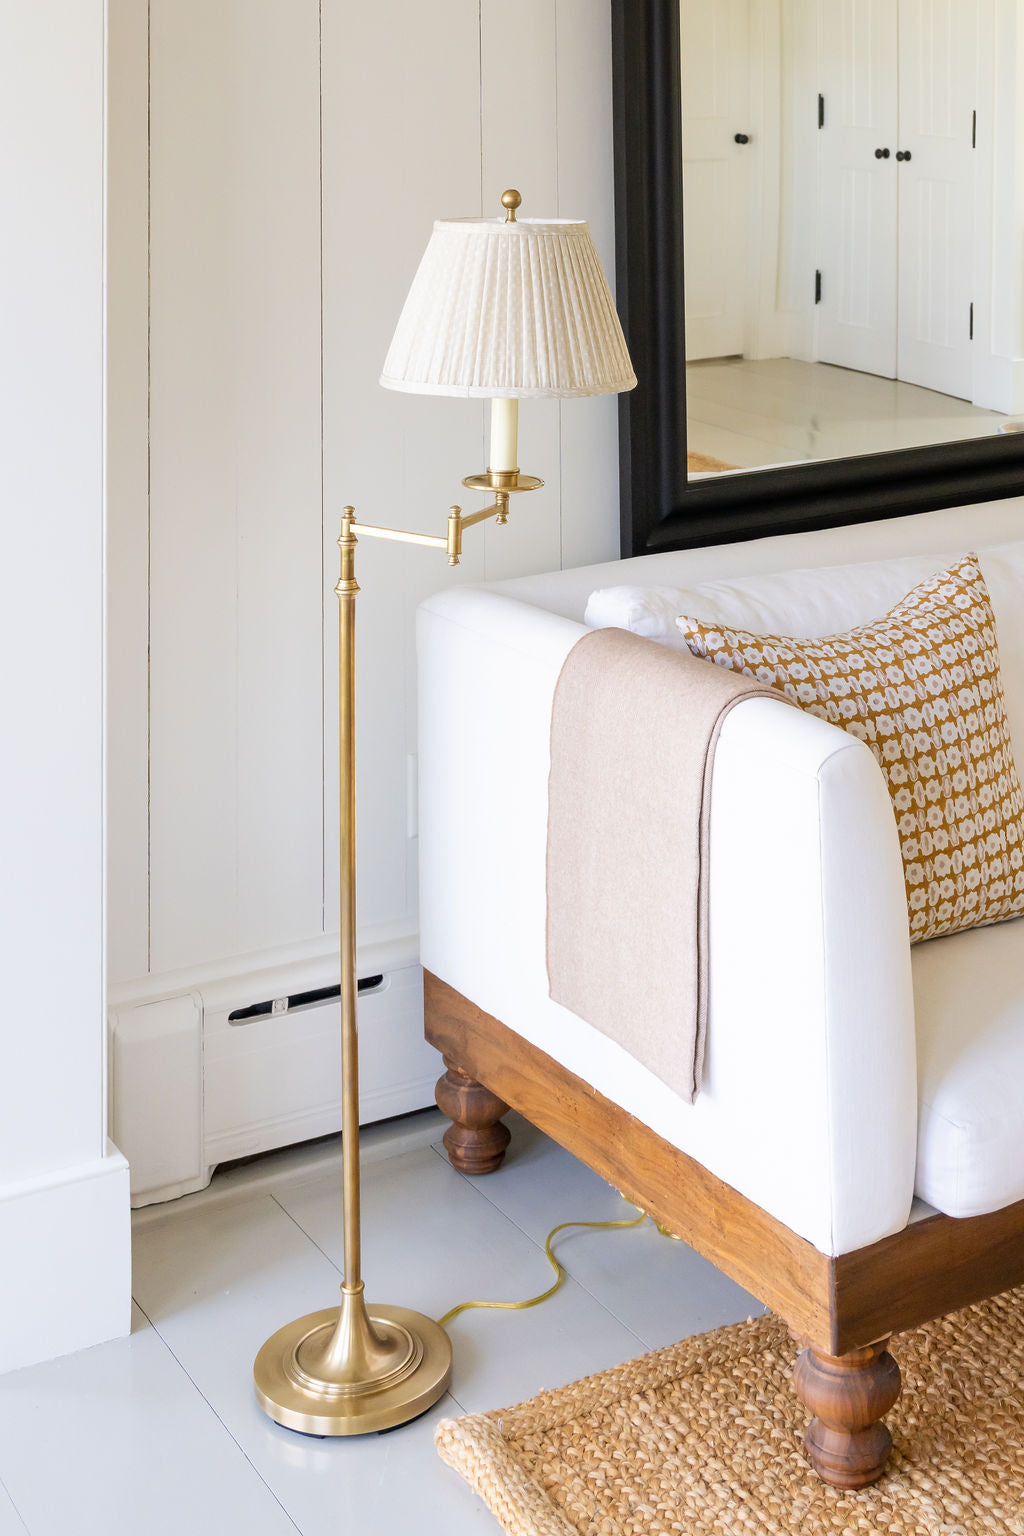 Dorchester Floor Lamp in Antique-Burnished Brass Finish | Newport Lamp And Shade | Located in Newport, RI